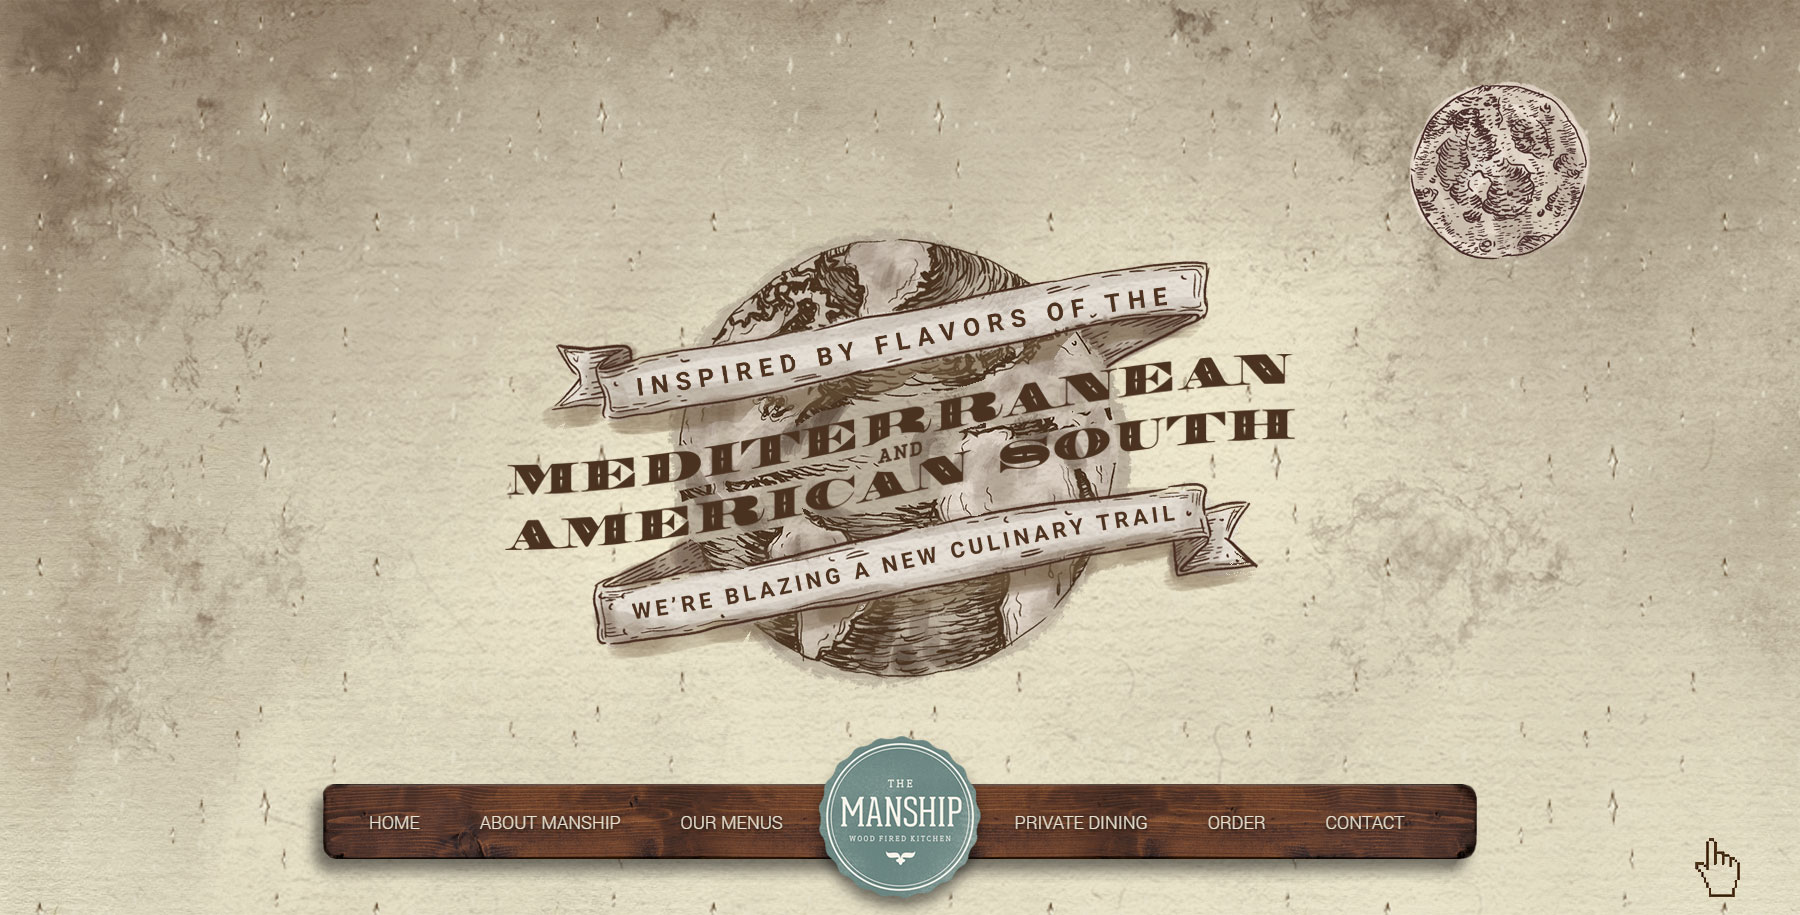 The Manship: Wood Fired Kitchen - Website of the Day